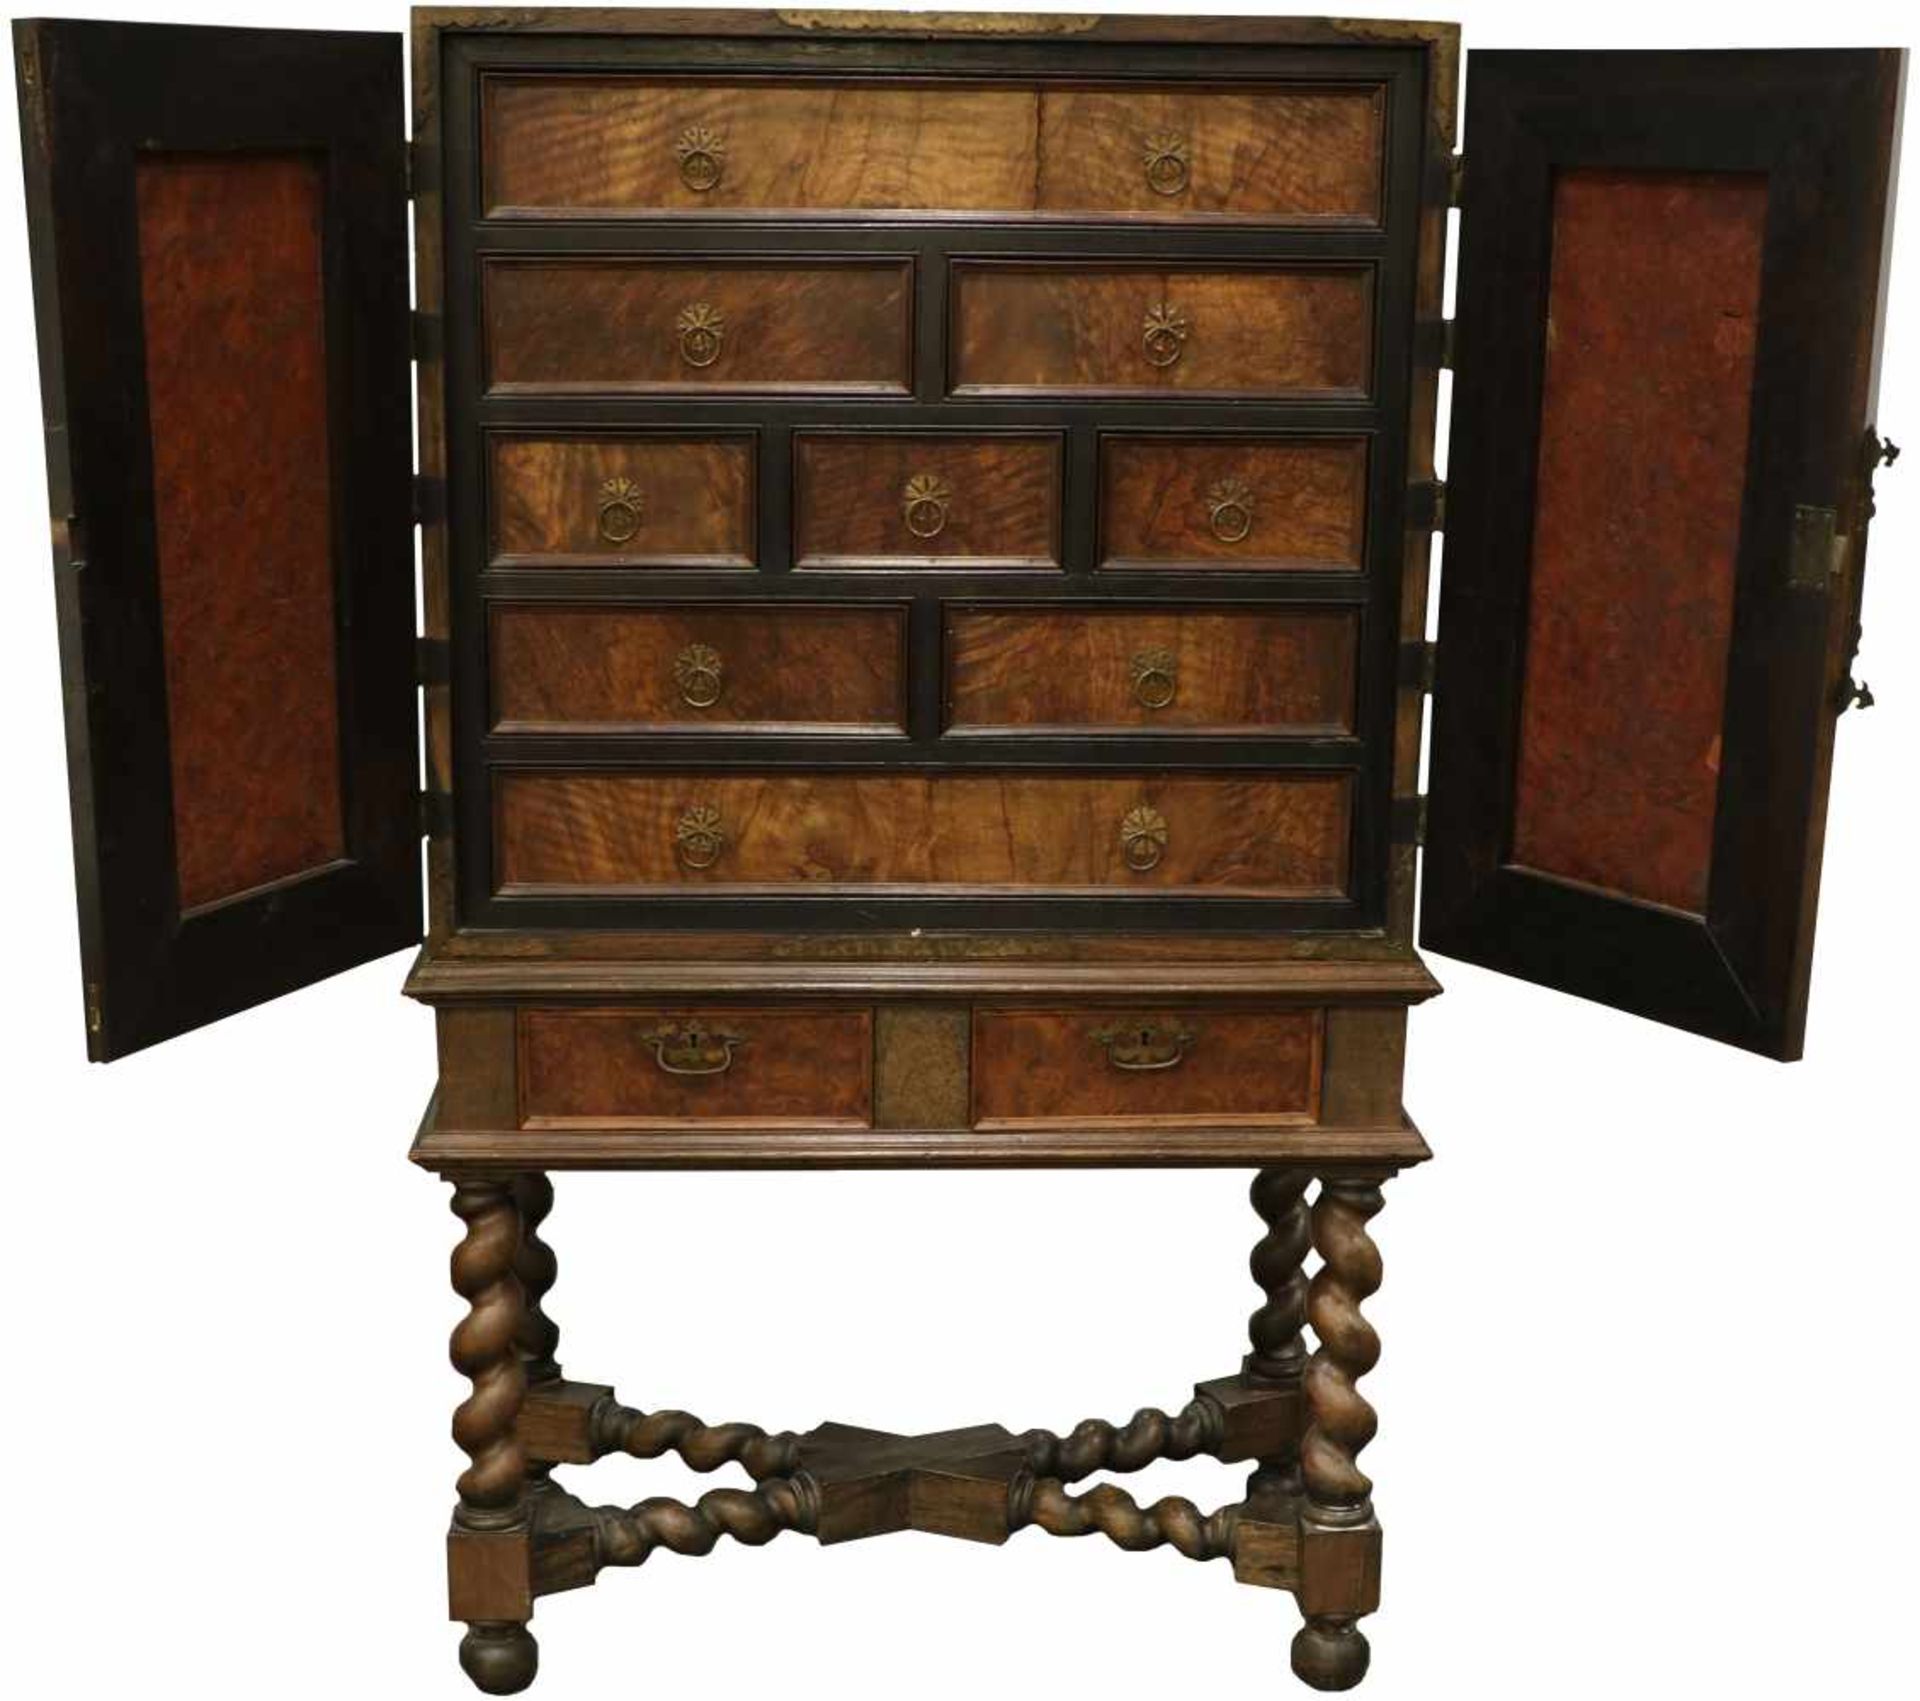 A 'simplicia-' cabinet or 'Kunstschrank', after antique example.